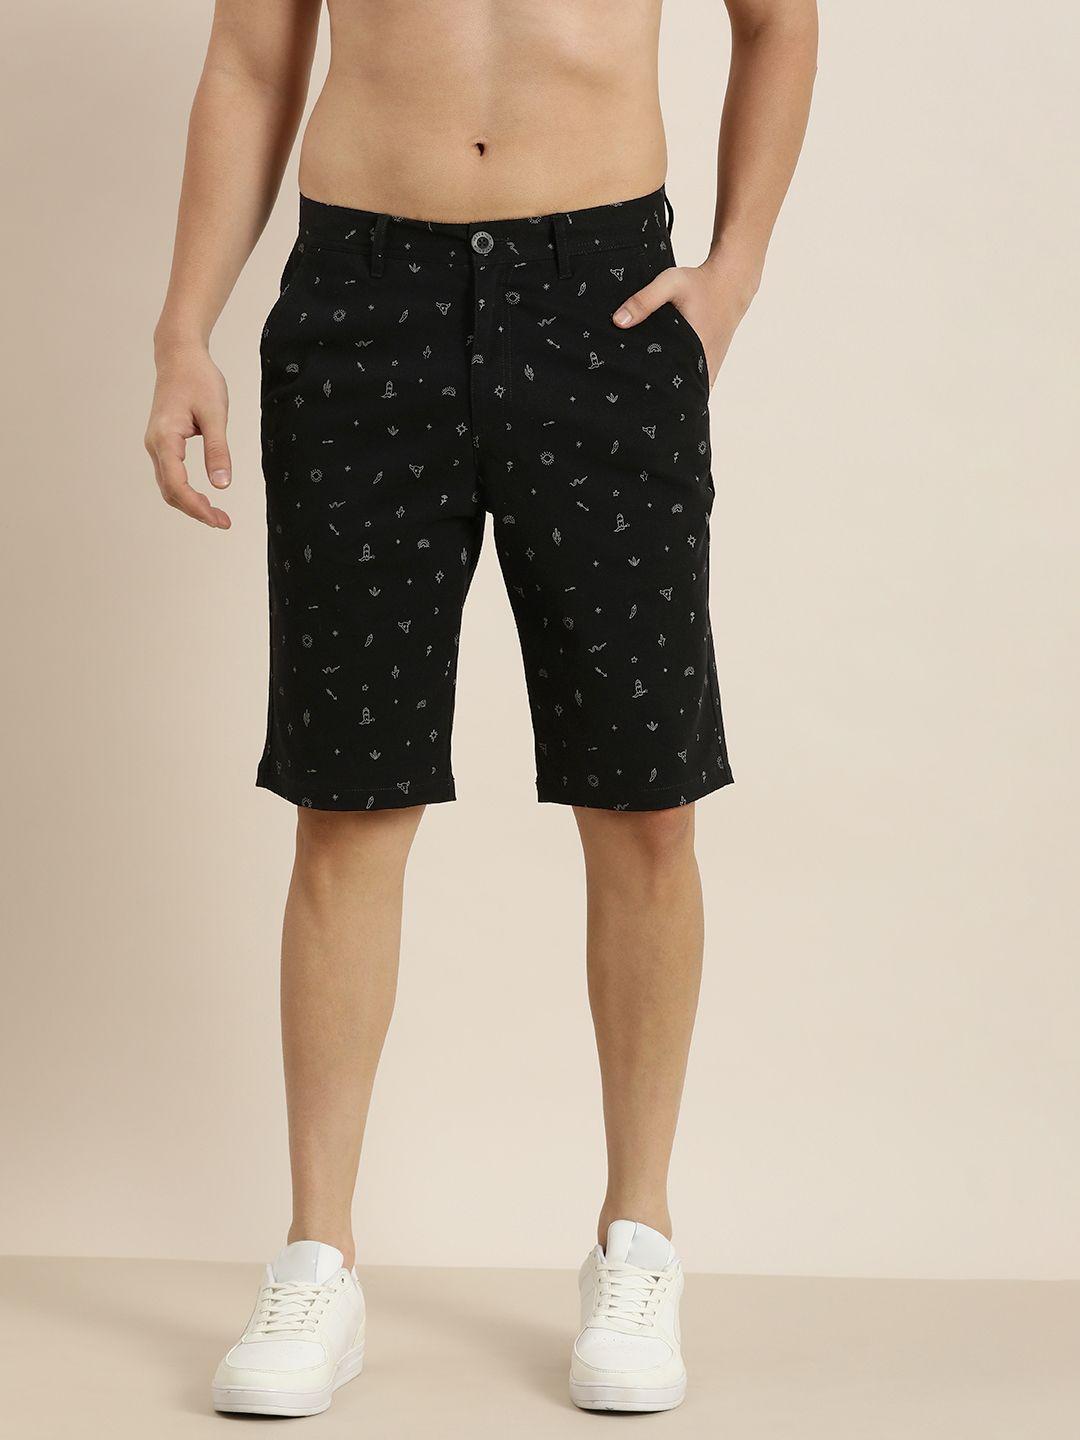 here&now men conversational printed slim fit shorts